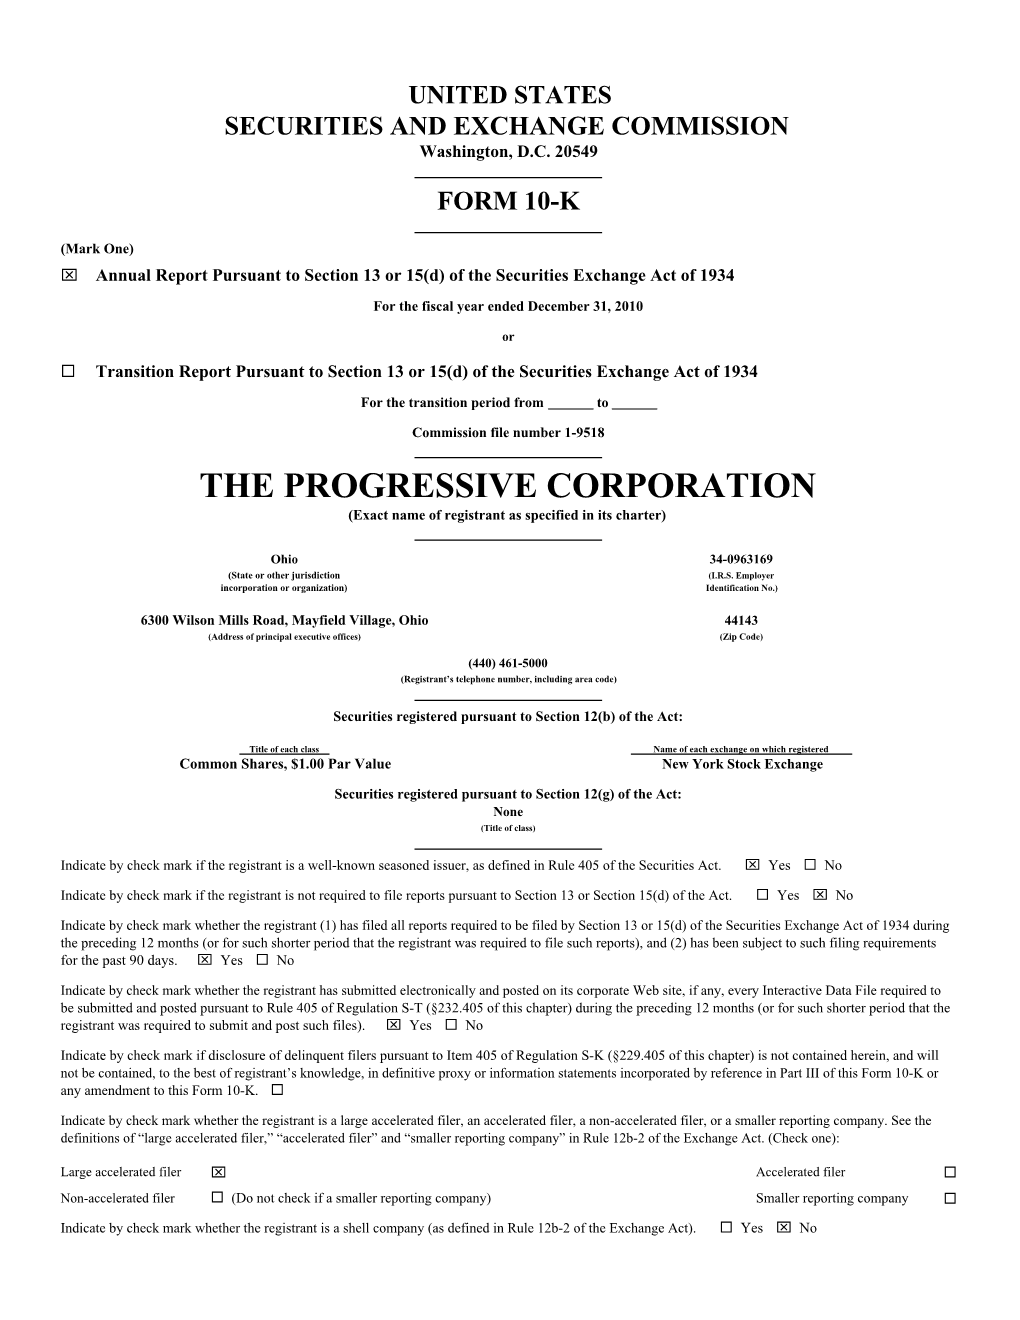 THE PROGRESSIVE CORPORATION (Exact Name of Registrant As Specified in Its Charter)